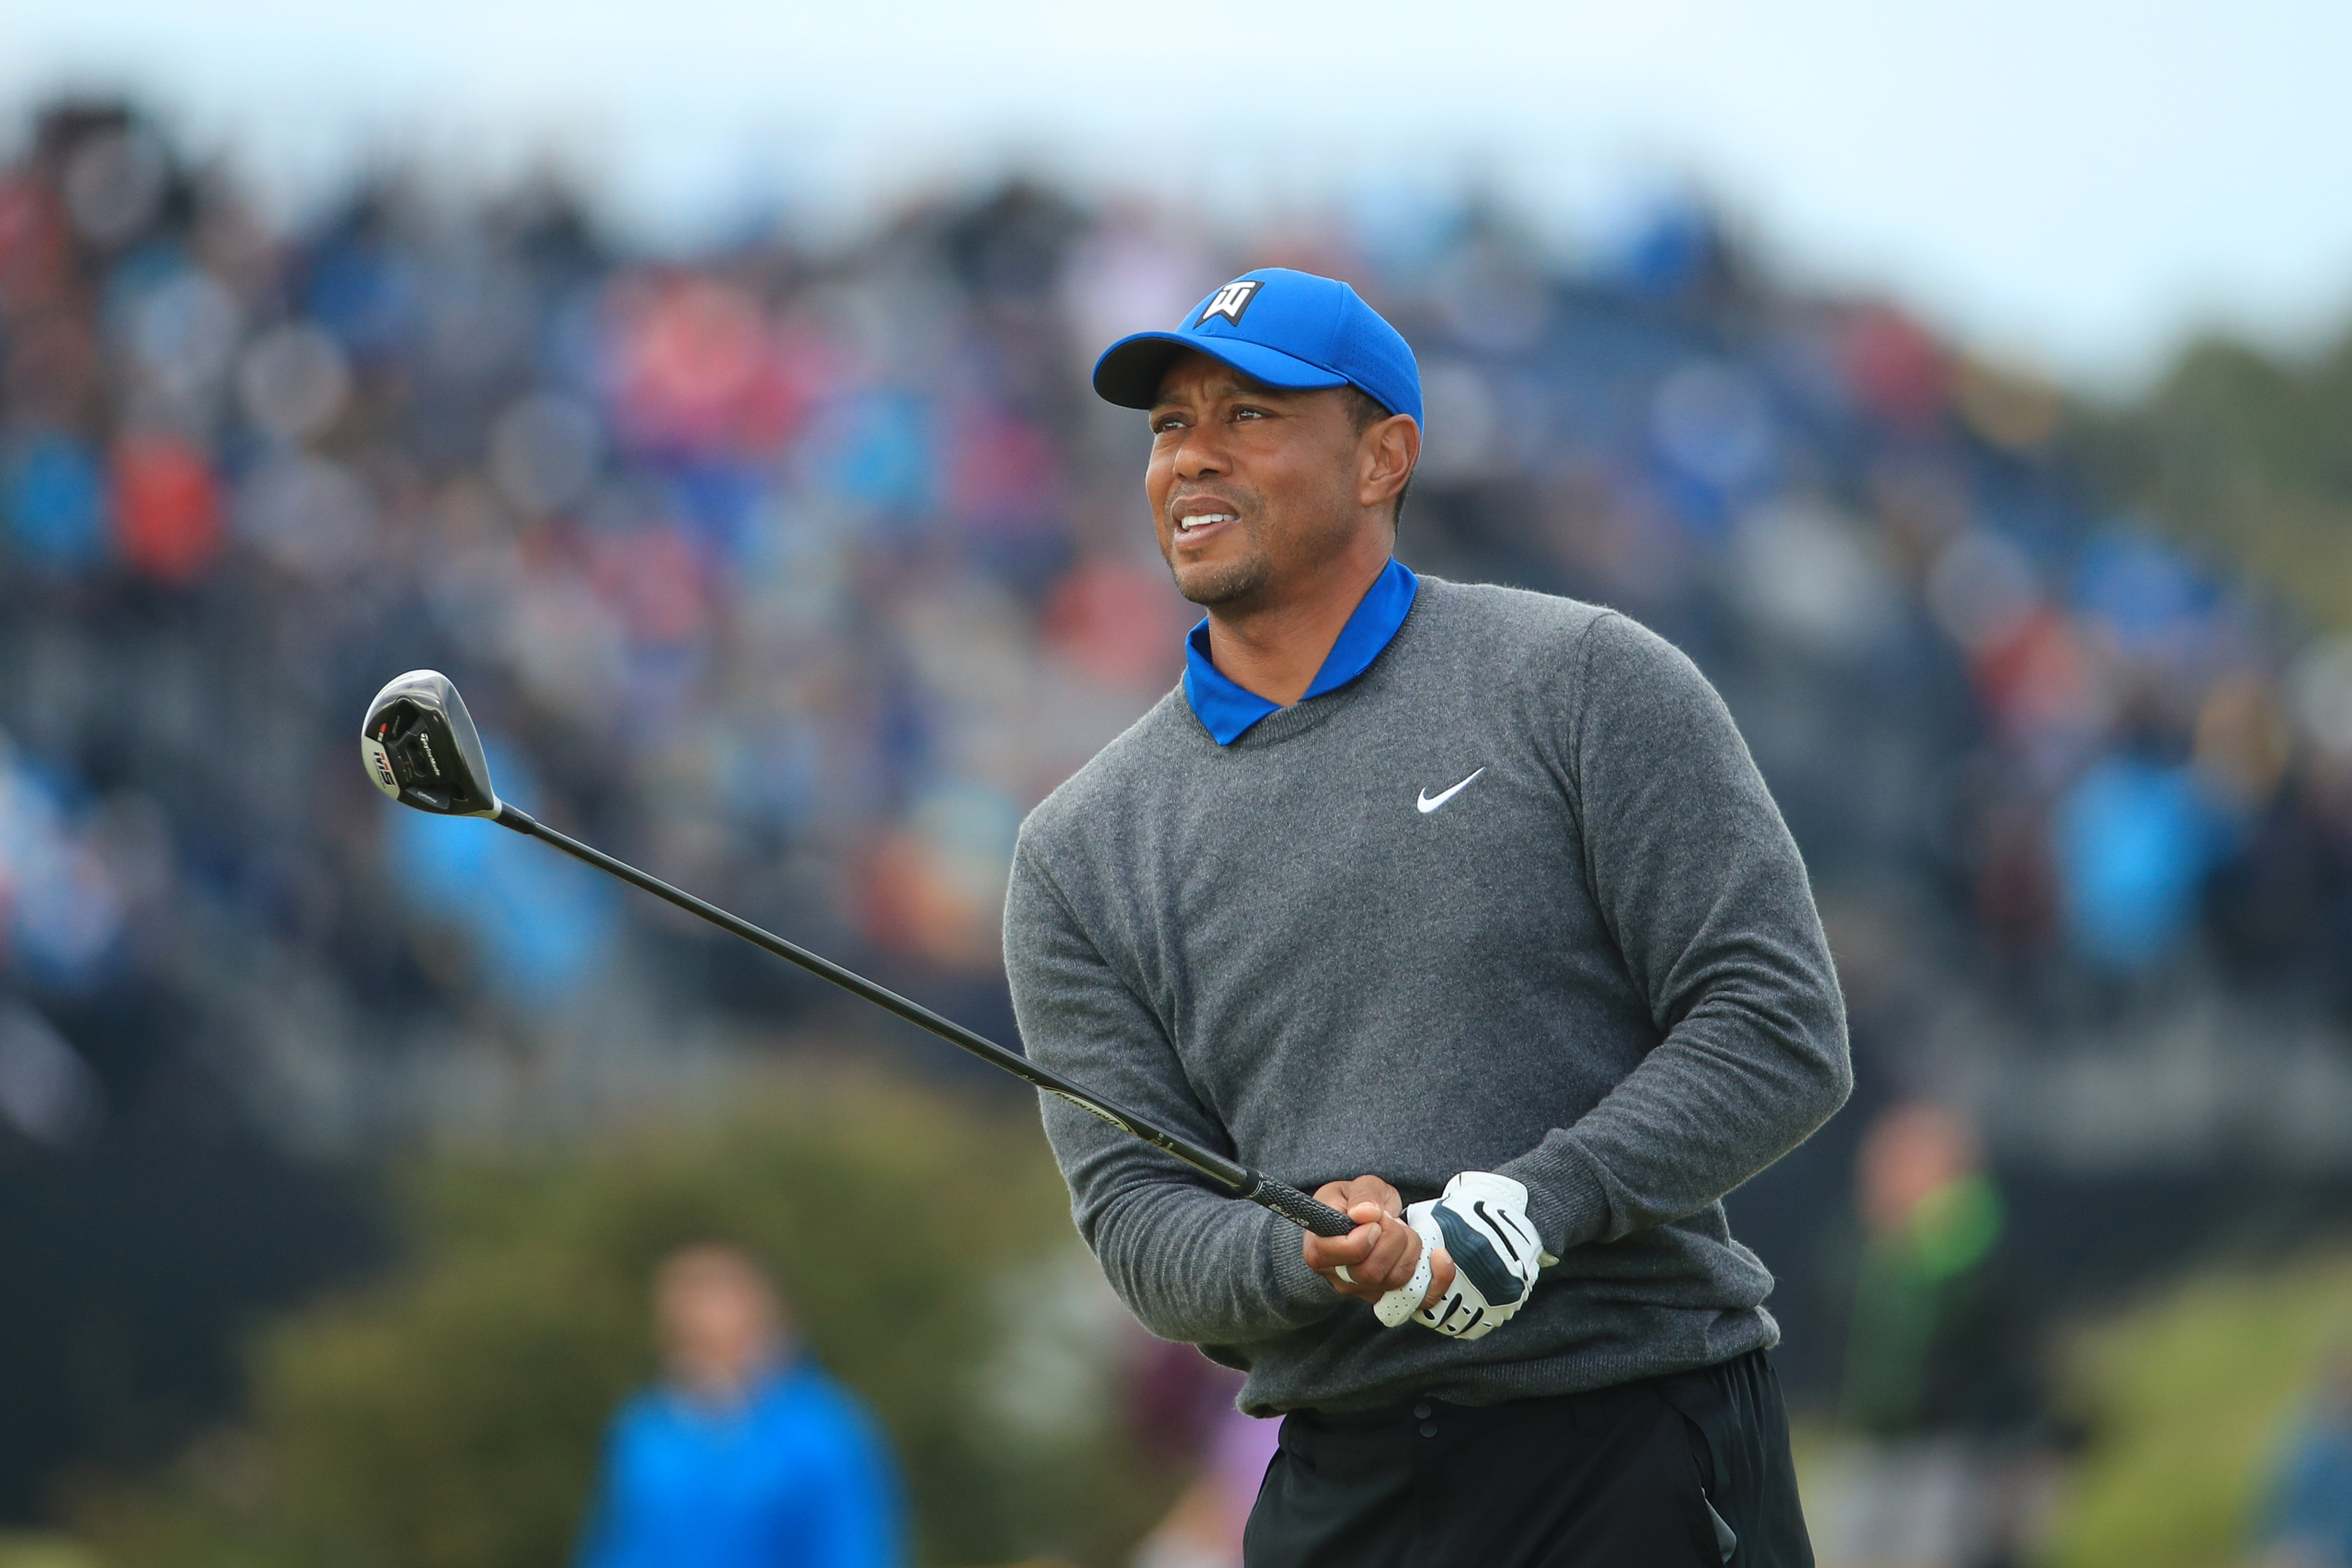 Tiger Woods struggled through a bad back and the cool, wet conditions at Royal Portrush.